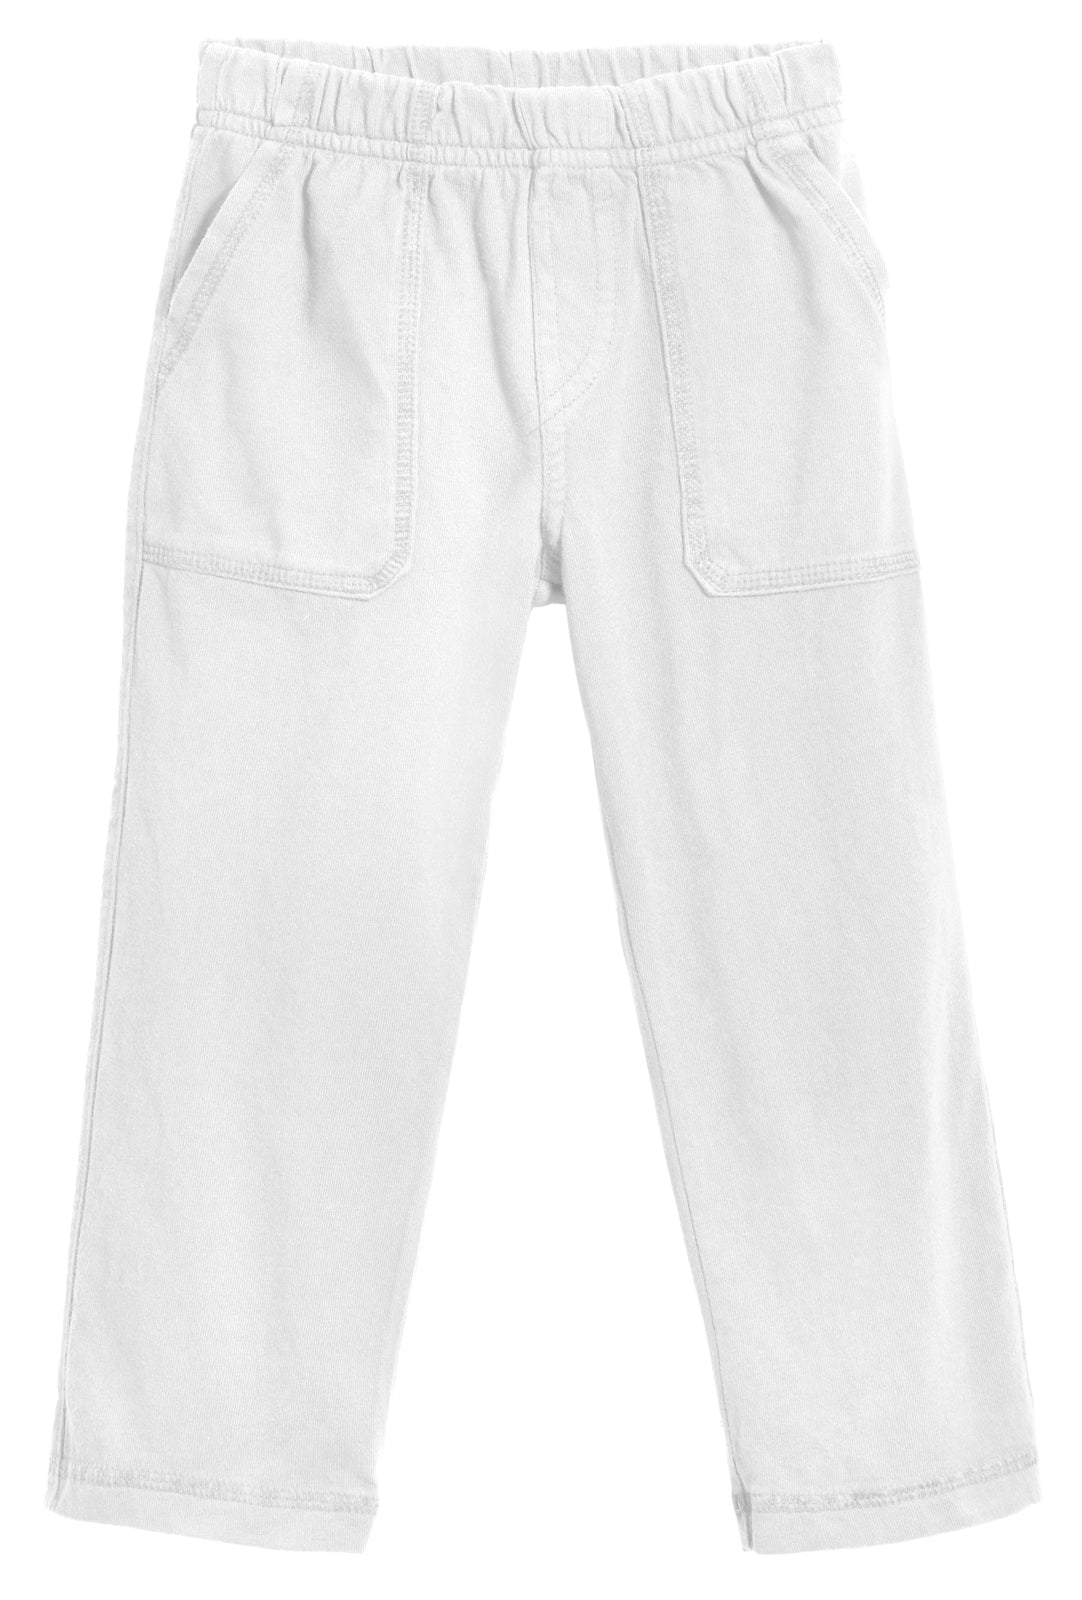 Buy Black and White Combo of 2 Ankle Length Trouser Cotton for Best Price,  Reviews, Free Shipping